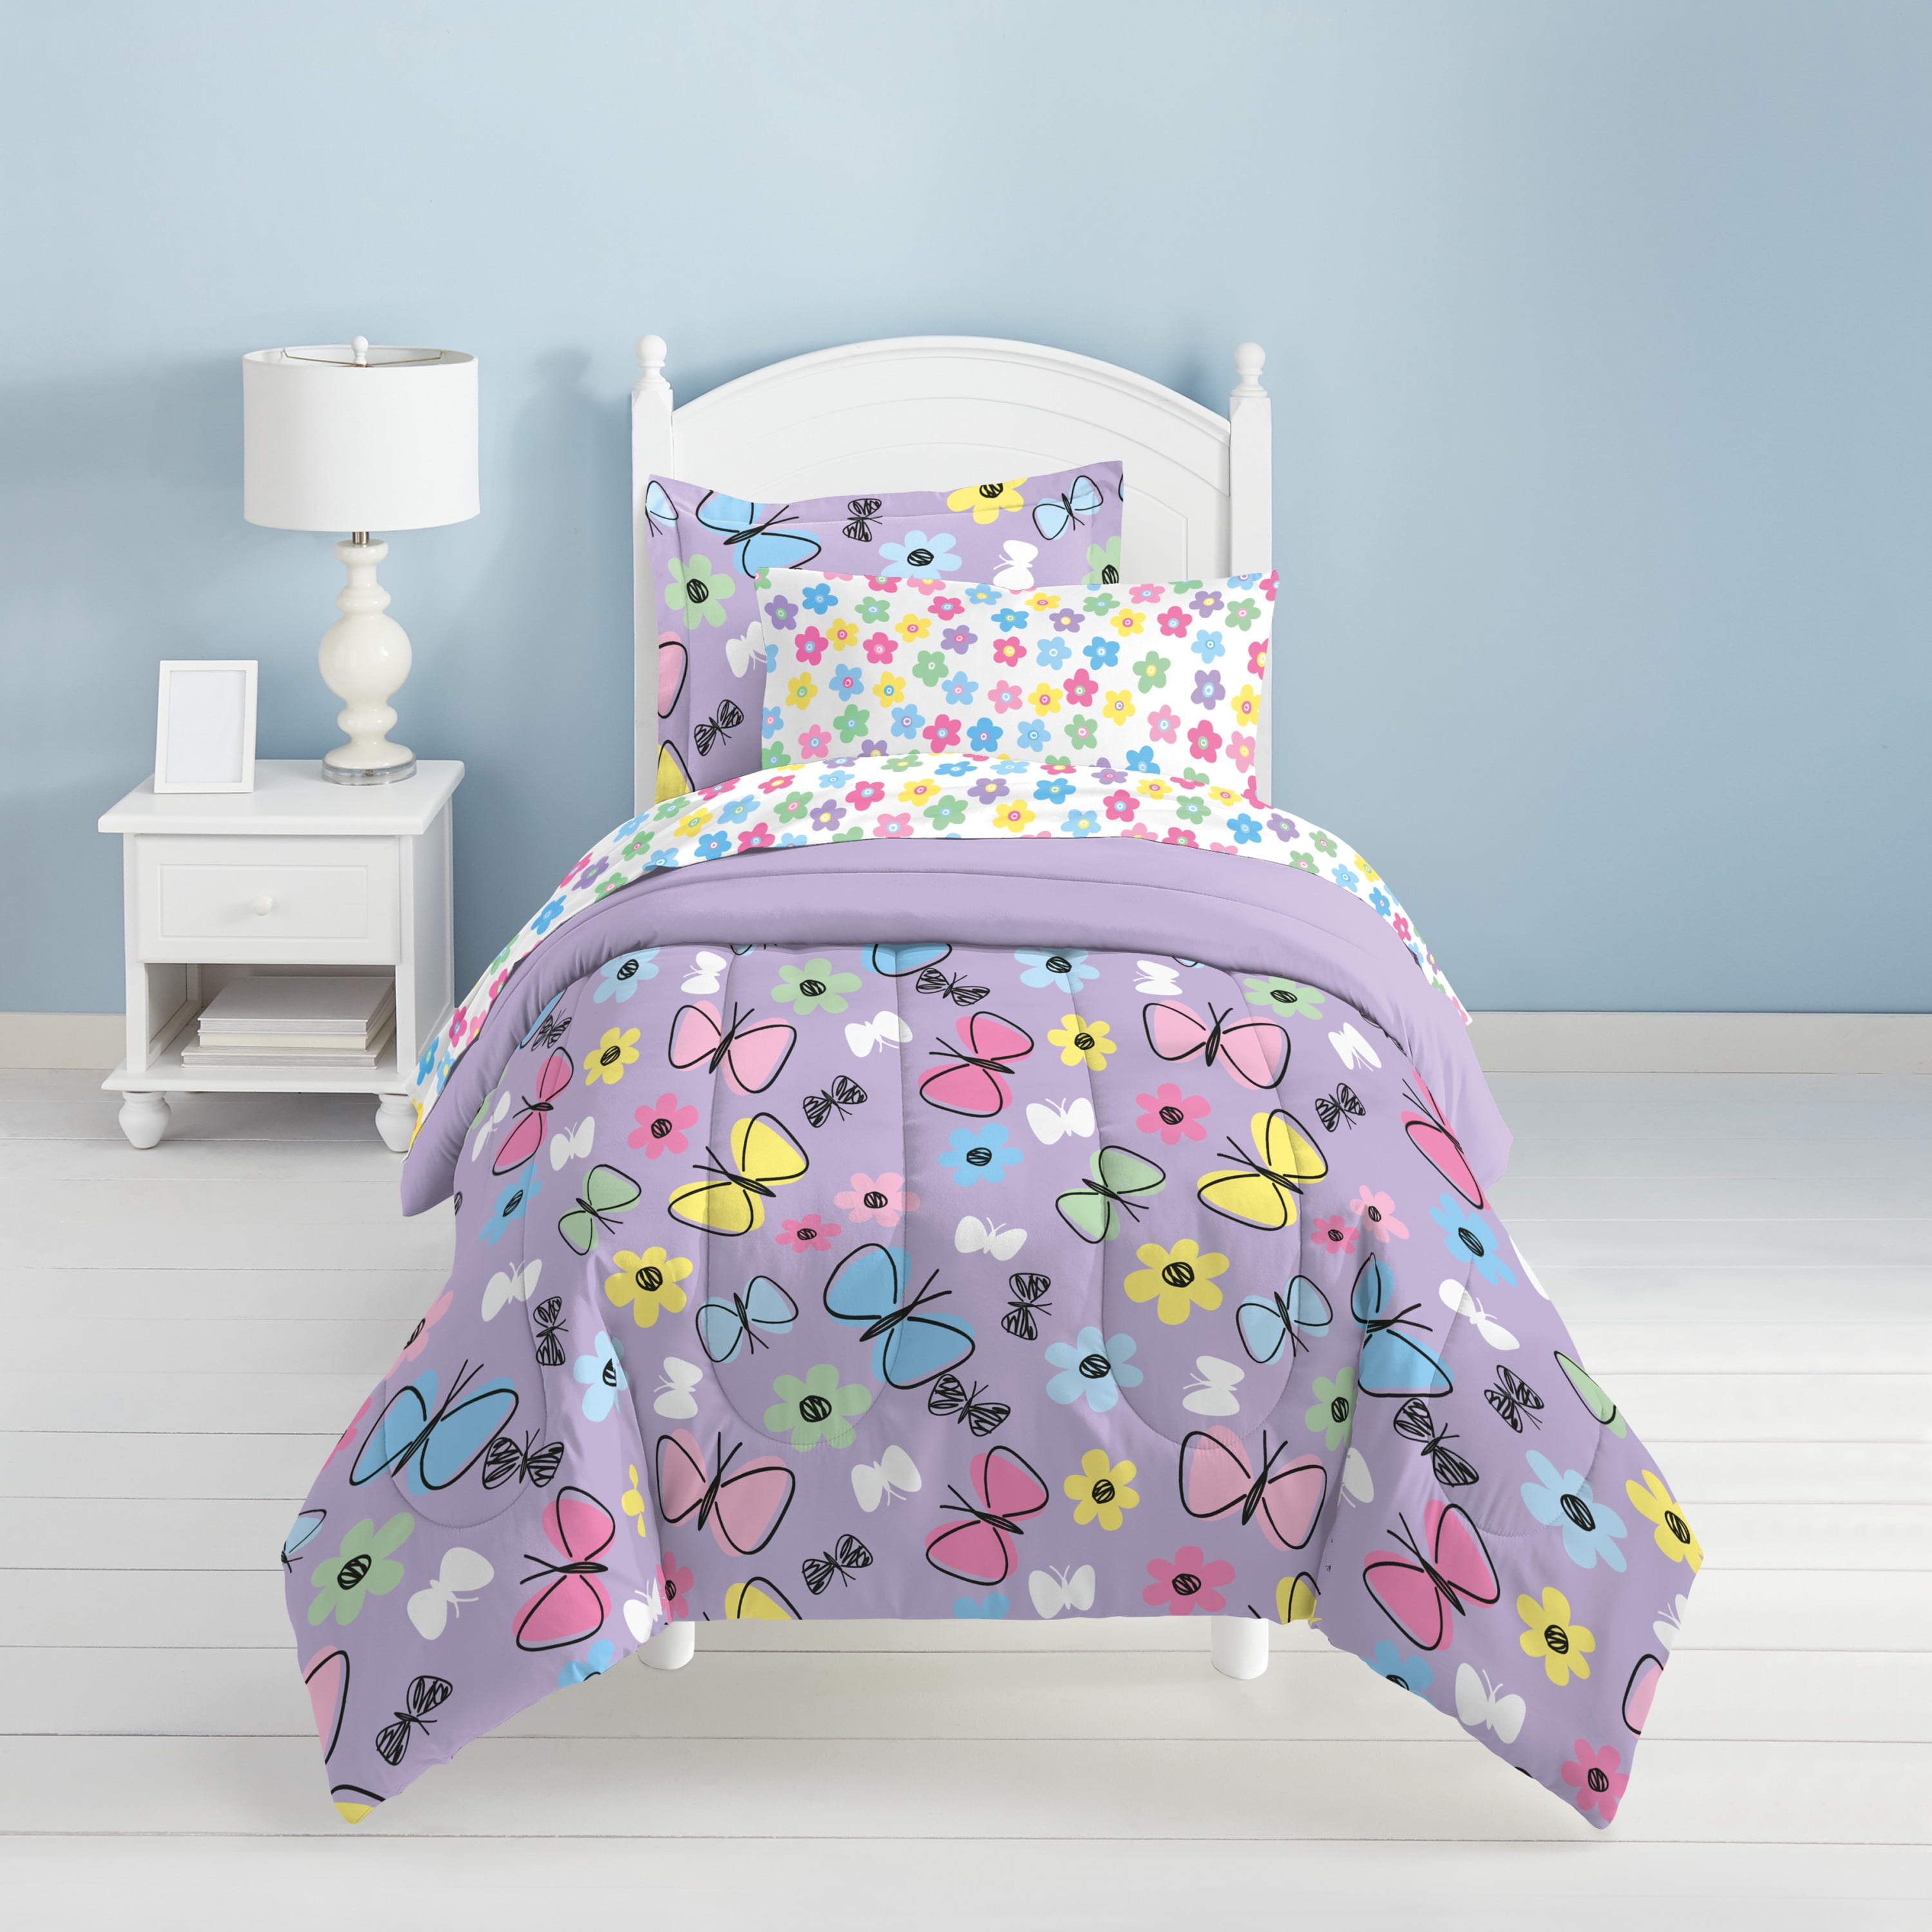 Bright Two Tone Ombre Pink Butterfly Duvet Cover Bedding Set with Pillowcases 